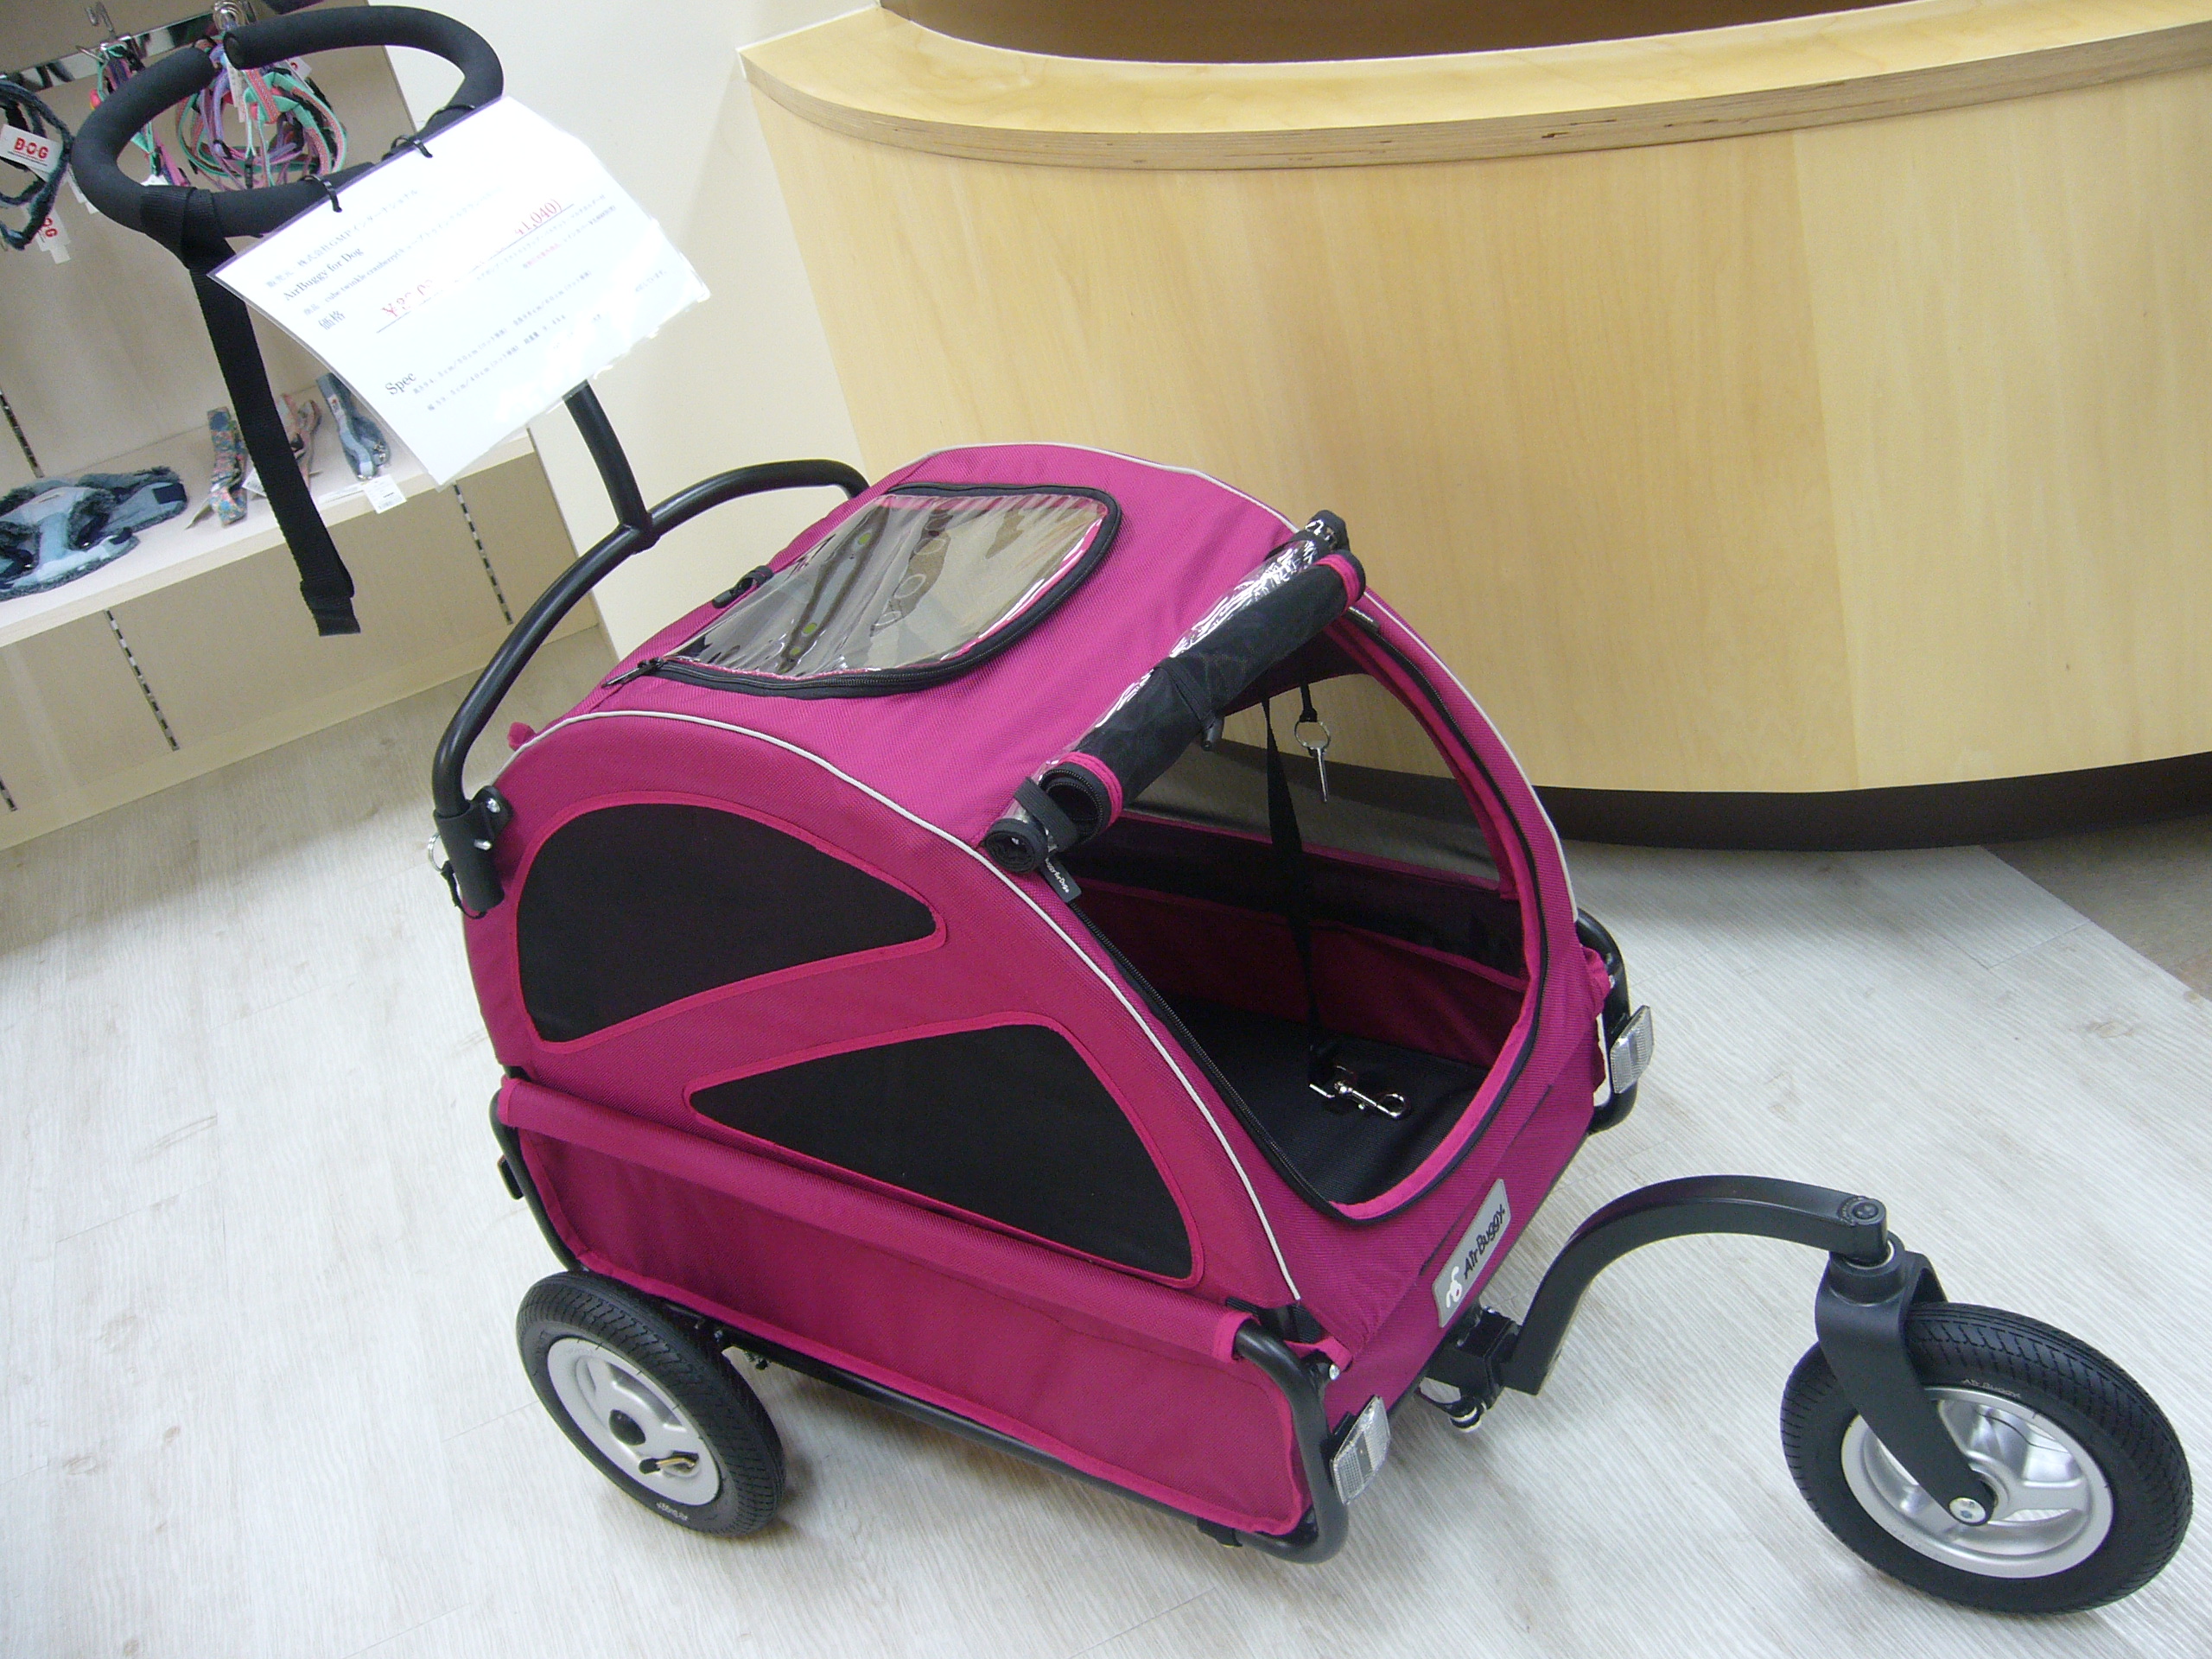 AIRBUGGY for DOG 取扱店 - Dog & Cat Waltz